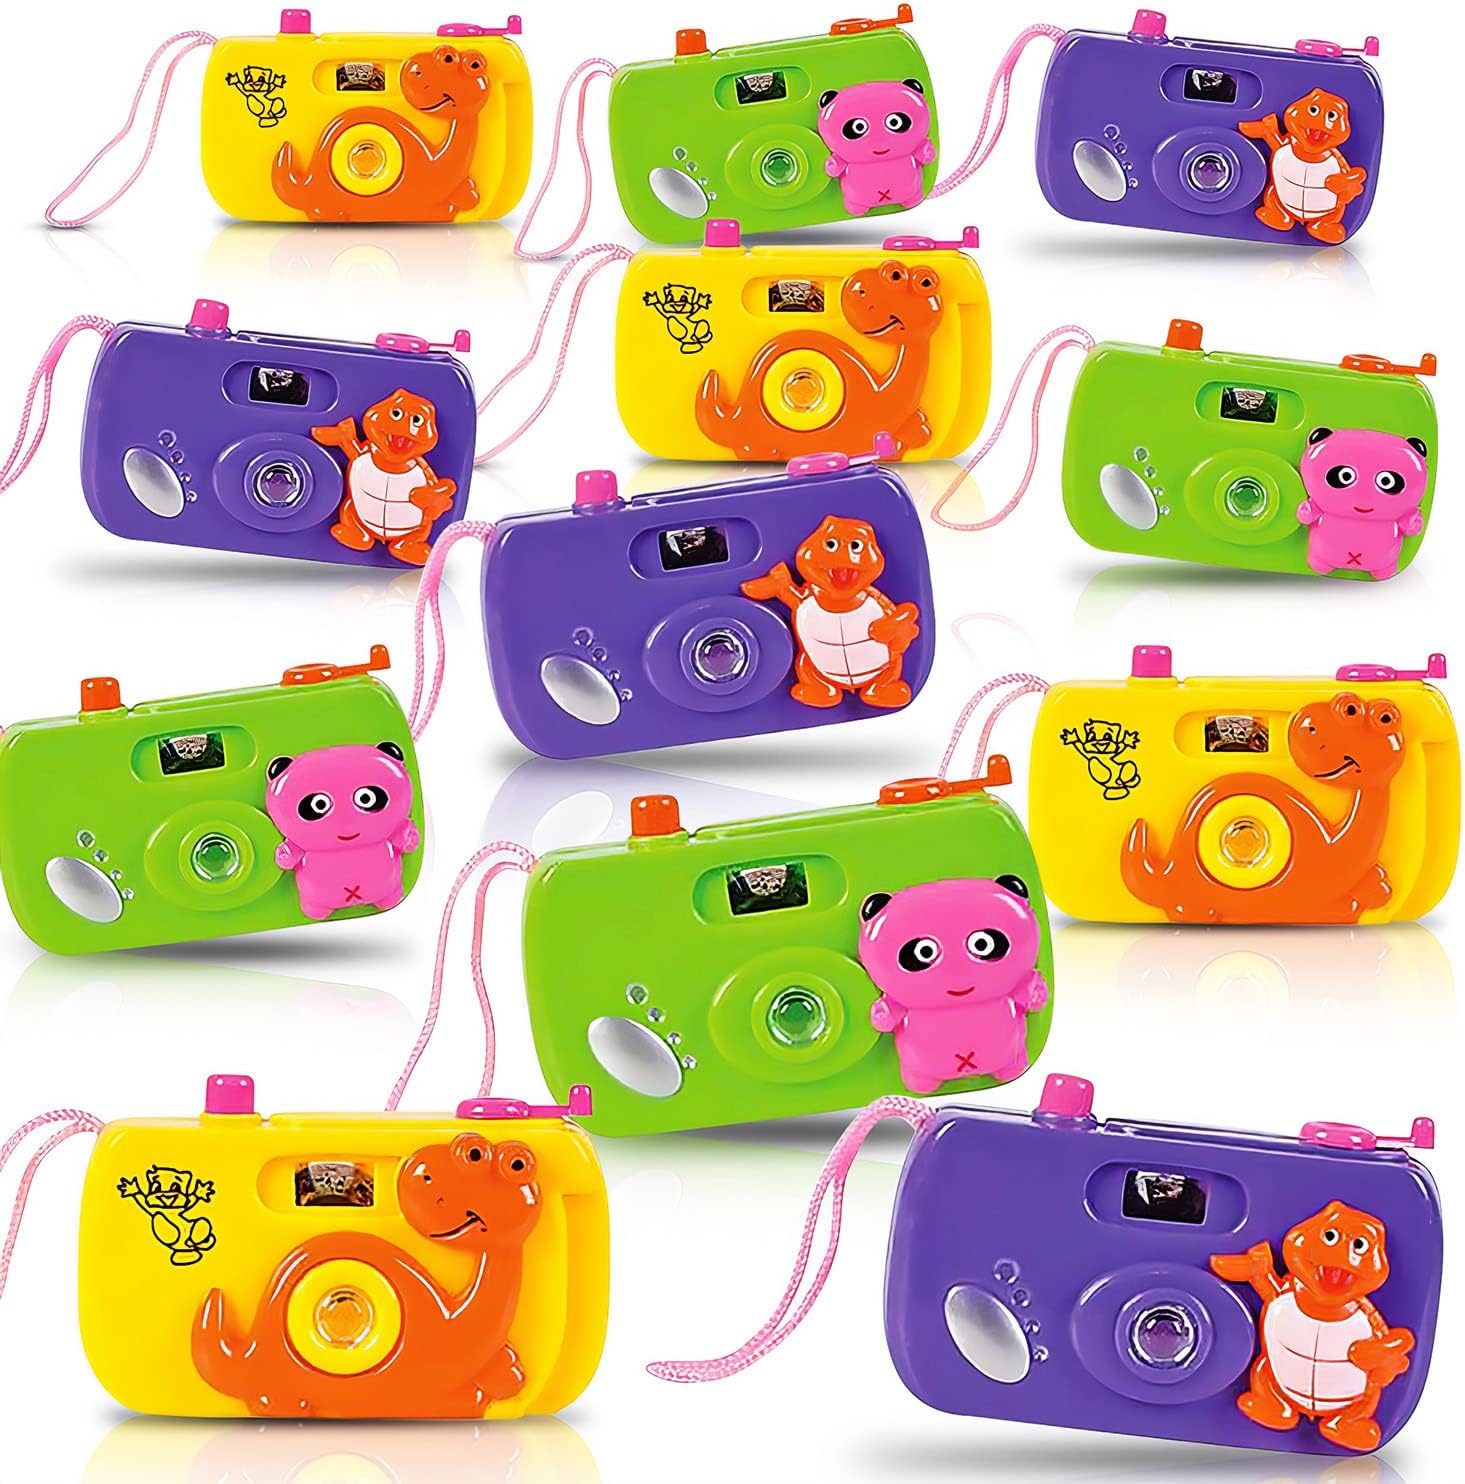 ArtCreativity Kids’ Camera Toy Set - Pack of 12 - Children’s Pretend Play Prop with Images in Viewfinder - Birthday Party Favors, Goodie Bag Fillers, Holiday Gift Idea for Boys, Girls, Toddler